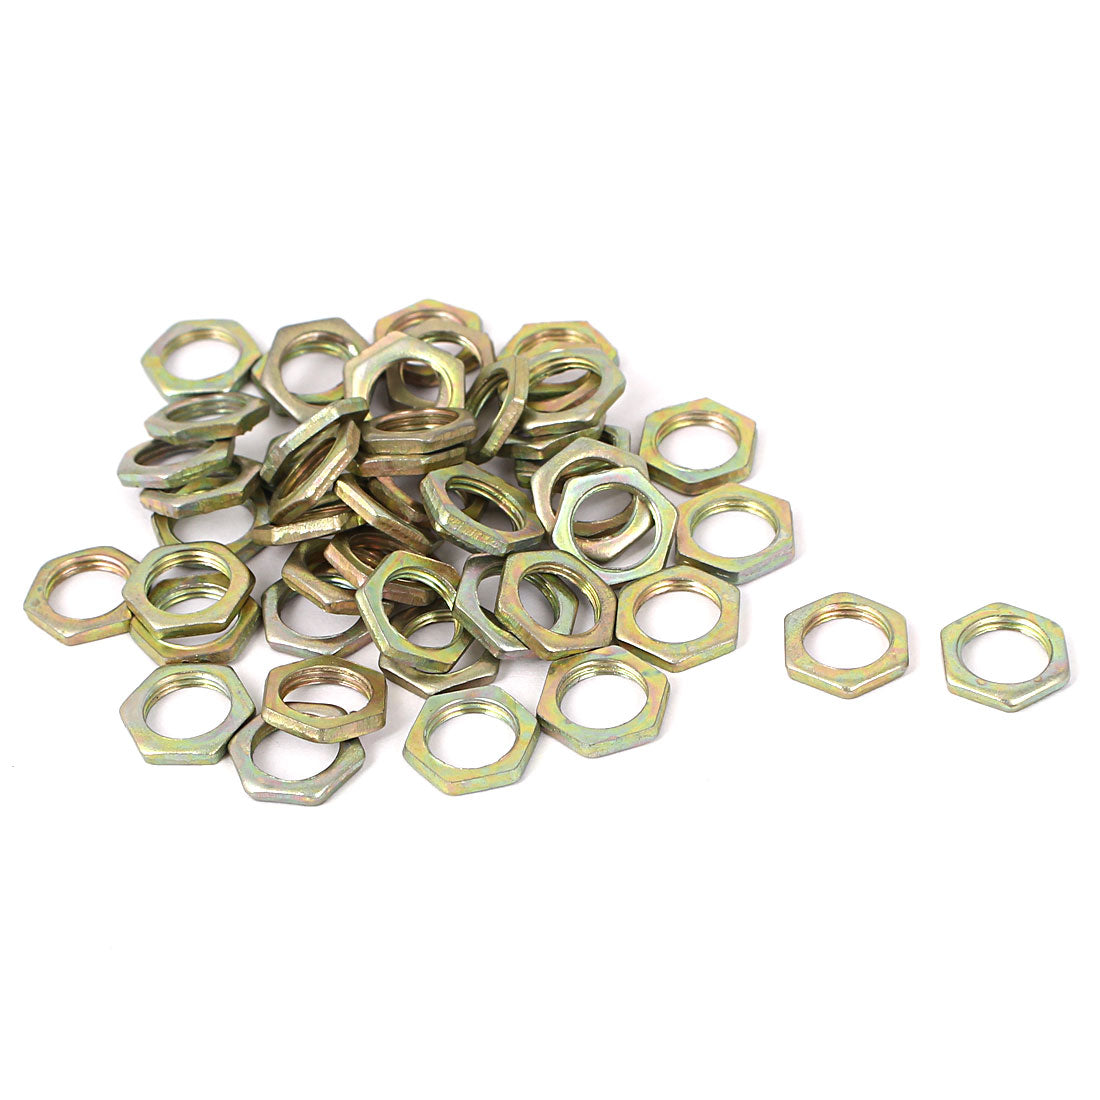 uxcell Uxcell M9x0.75x2.5mm Carbon Steel Hex Nuts Fastener 50pcs for Screws Bolts